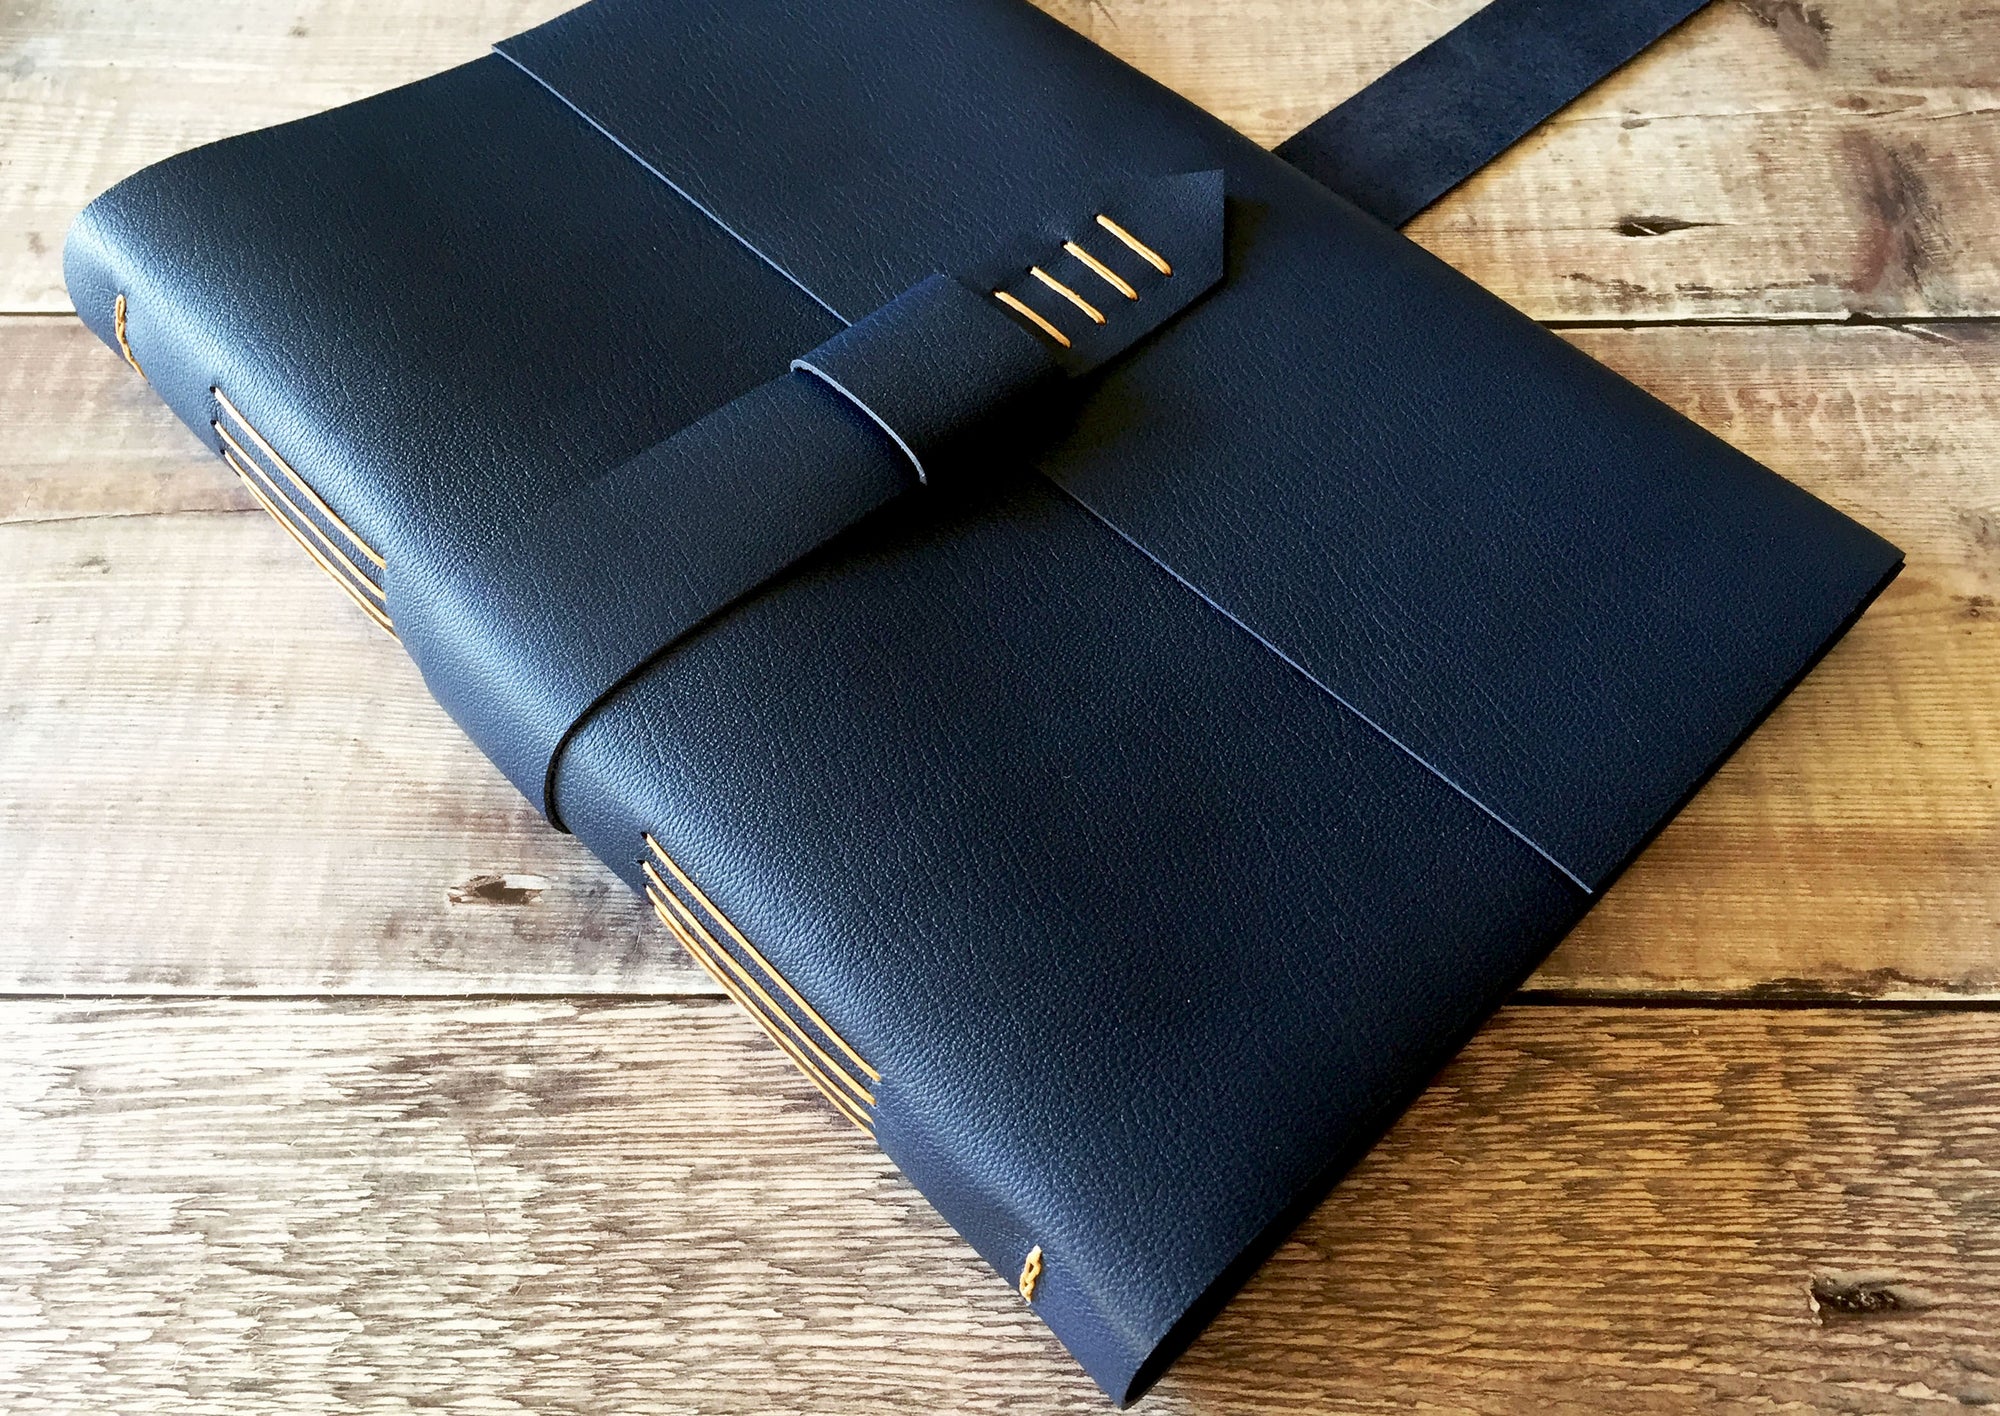 Longstitch with Linkstitch Leather Bound Journal, Navy Blue and Tan against wood background.